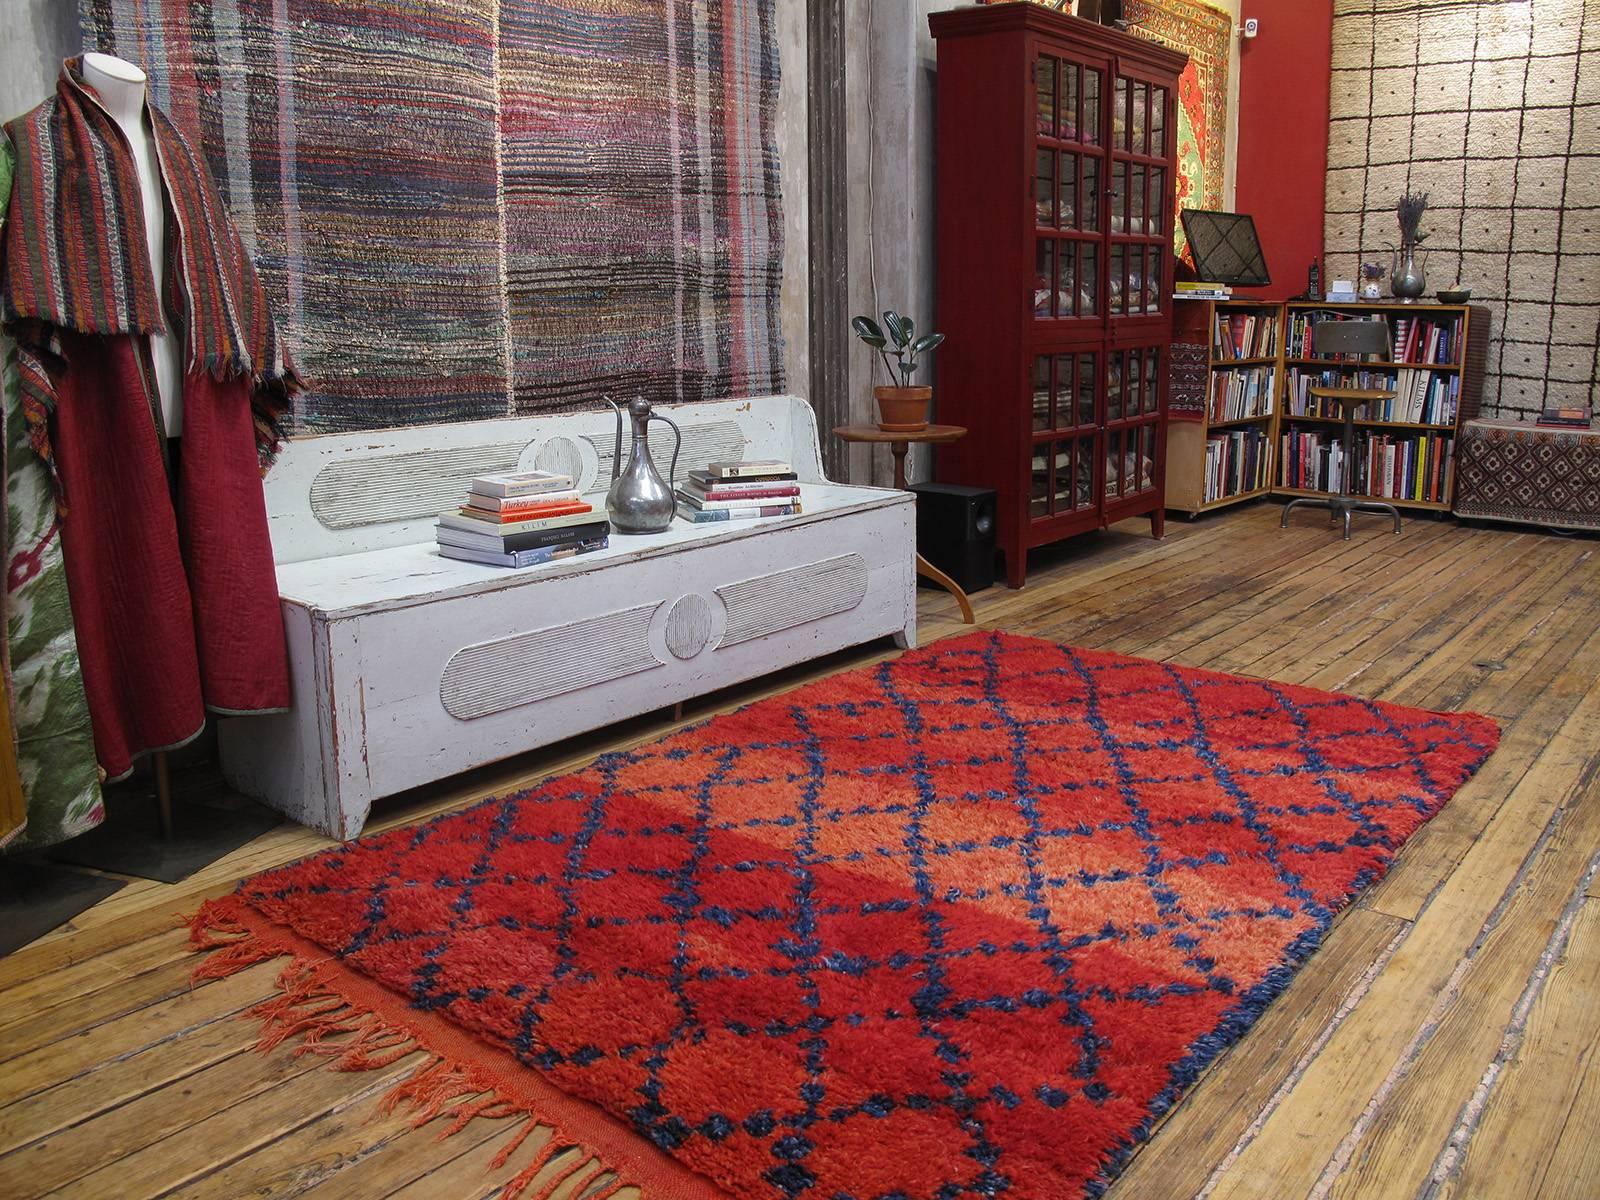 Simple and elegant with an incredibly inviting color palette, it takes a while to appreciate this is no ordinary Berber rug. A brilliant example attributed to the Ait Sgougou of the Middle Atlas Mountains of Morocco. The rich indigo color is an